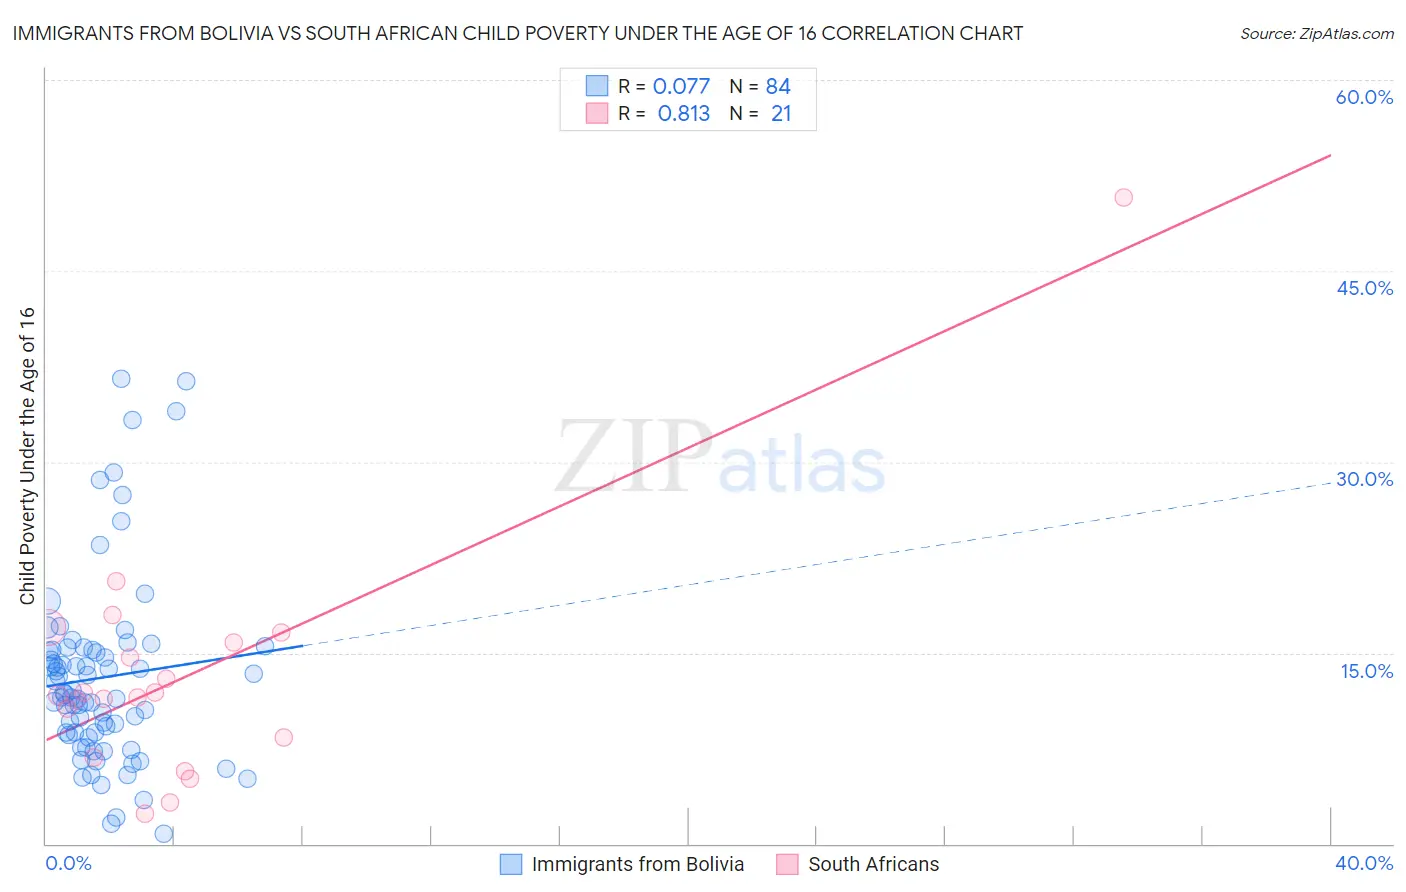 Immigrants from Bolivia vs South African Child Poverty Under the Age of 16